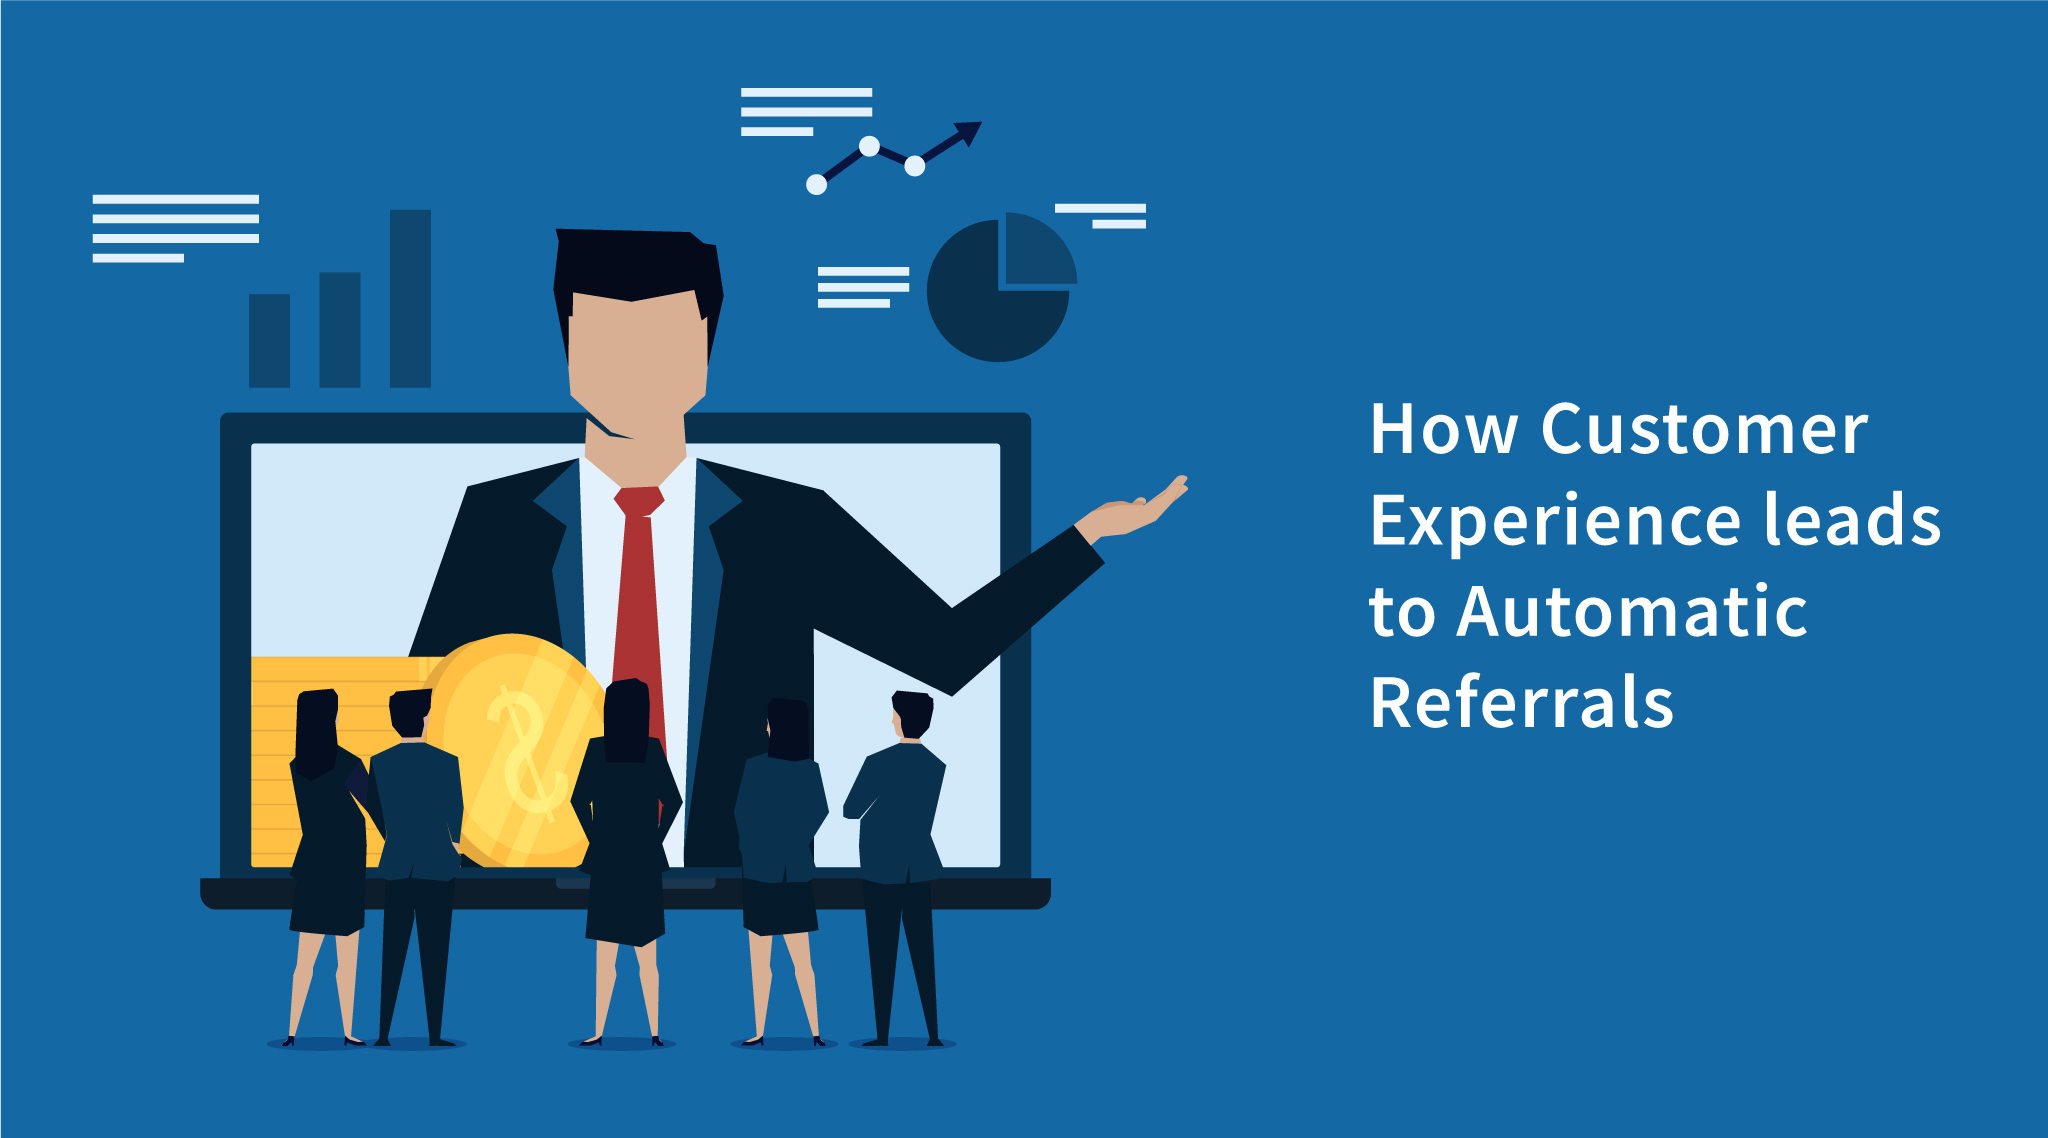 How Customer Experience leads to Automatic Referrals